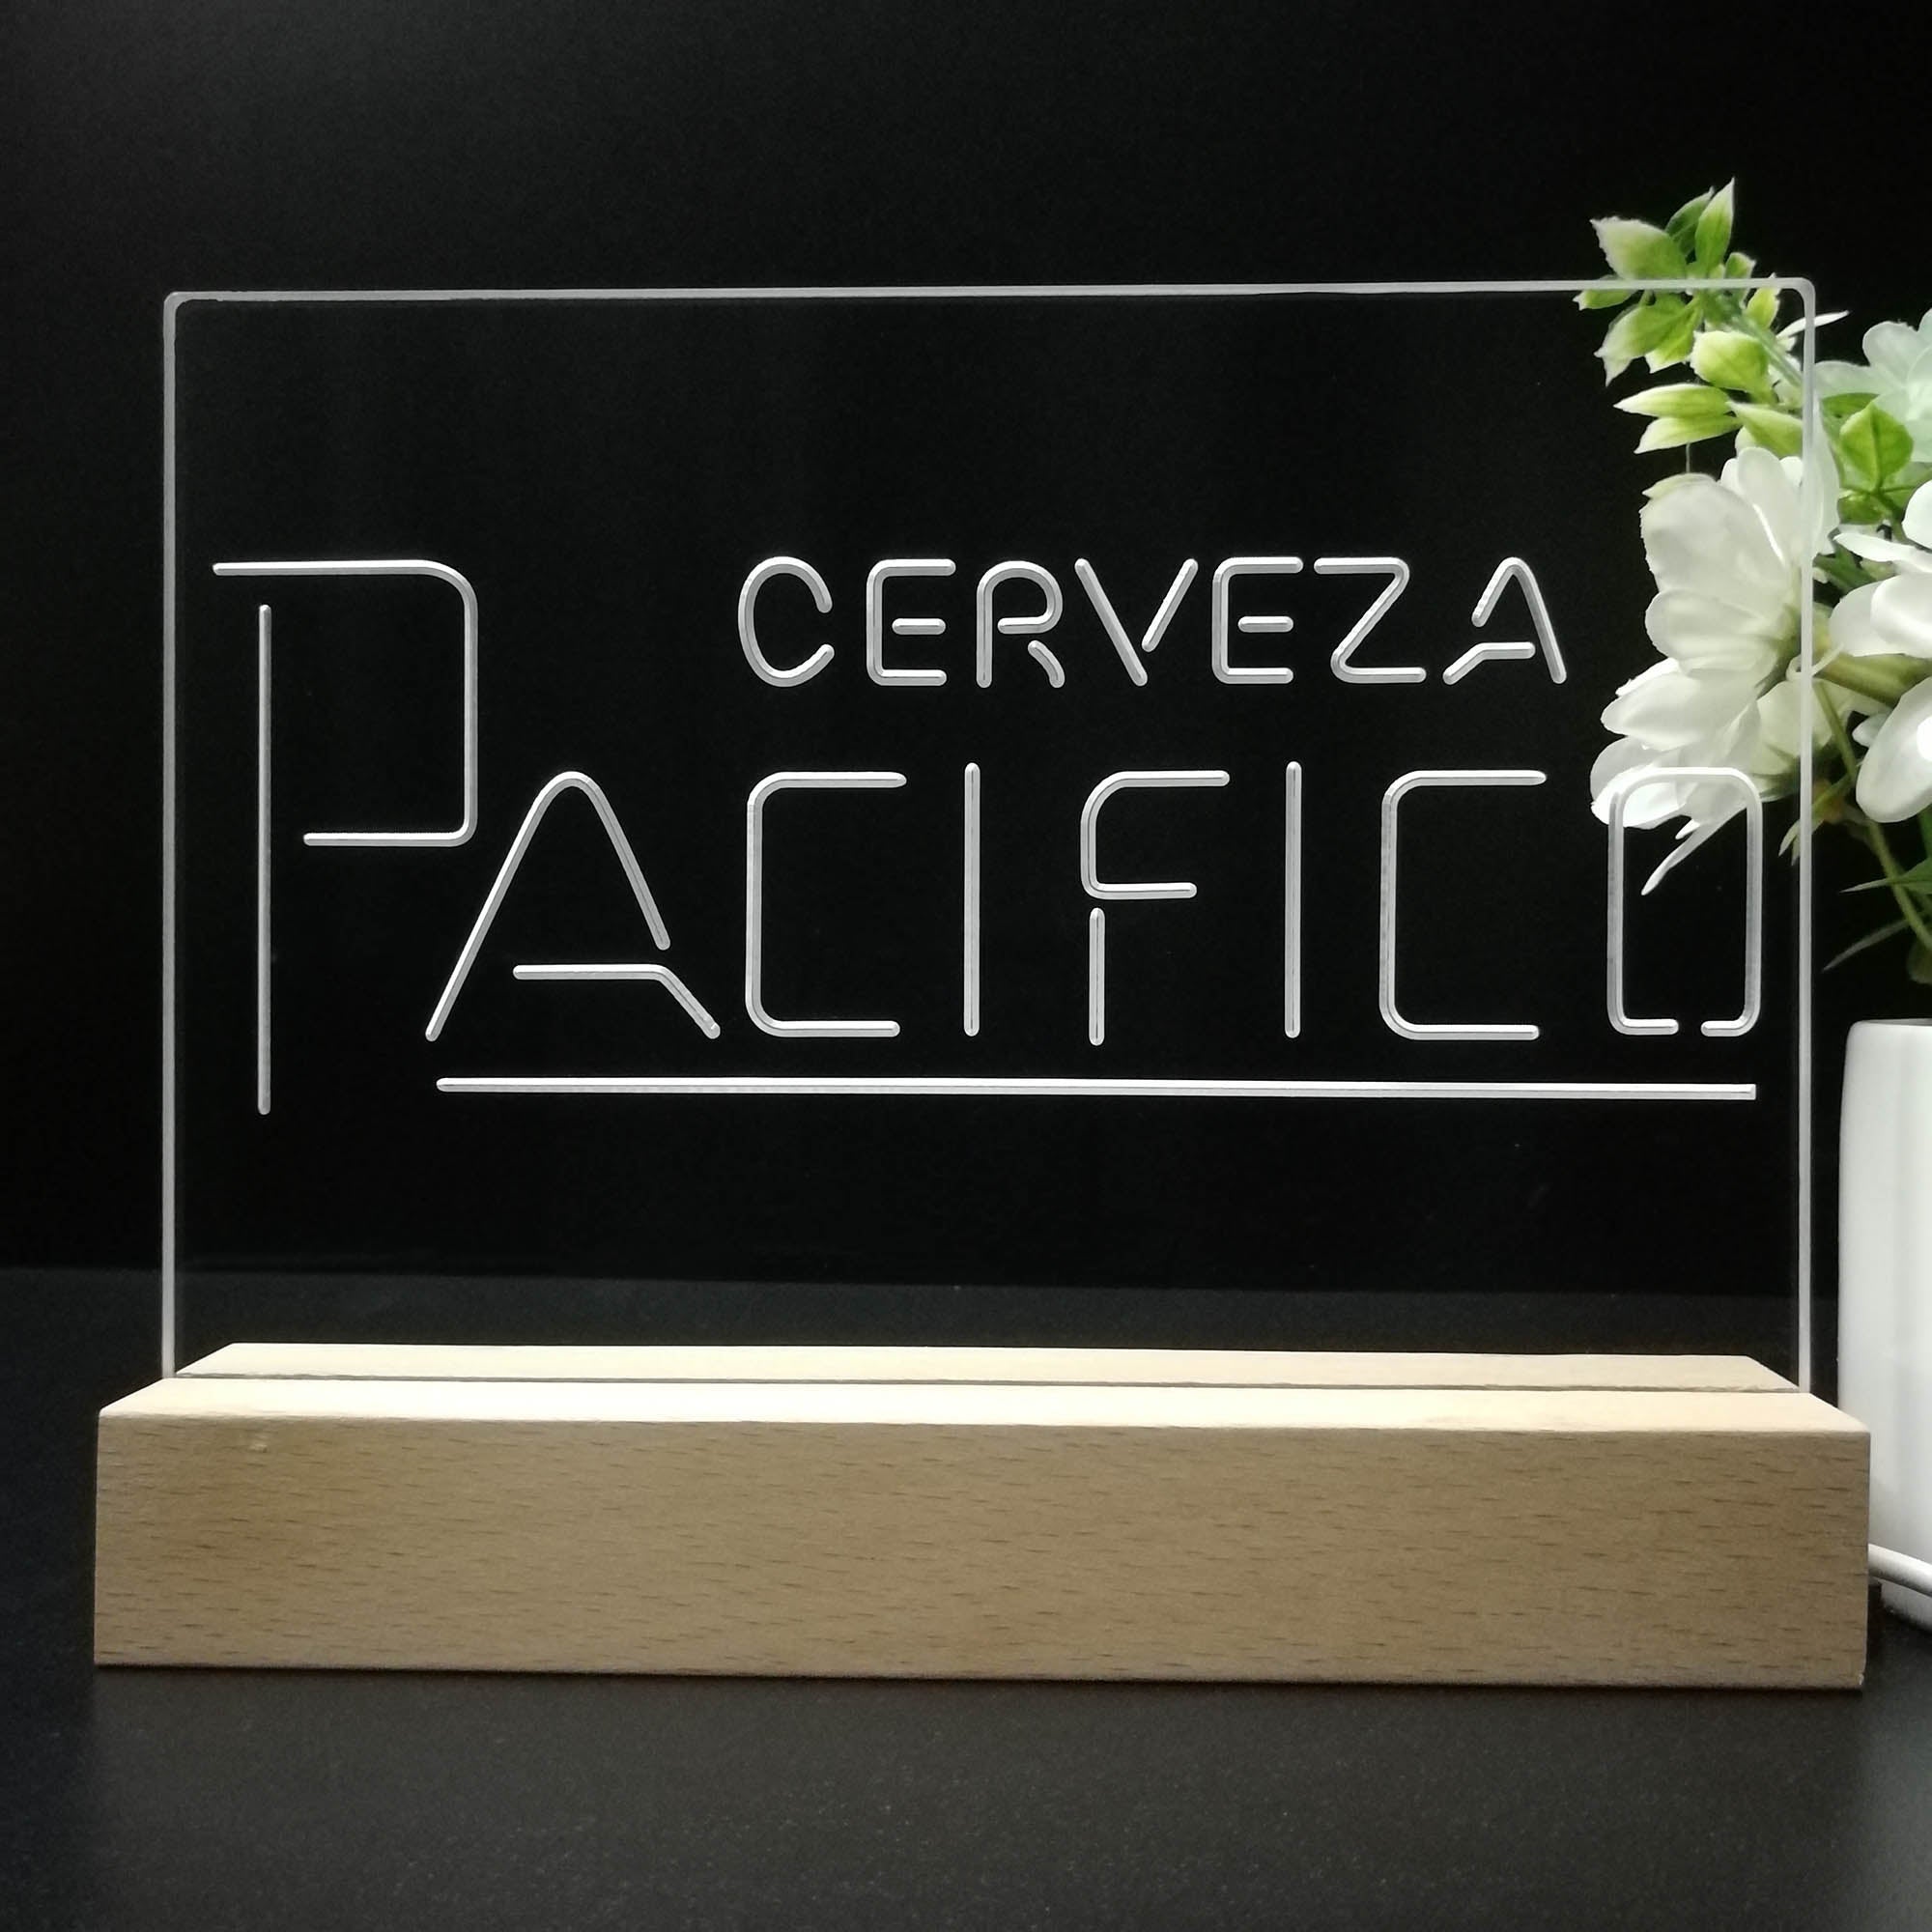 Cerveza Pacifico Bar Beer Night Light LED Sign